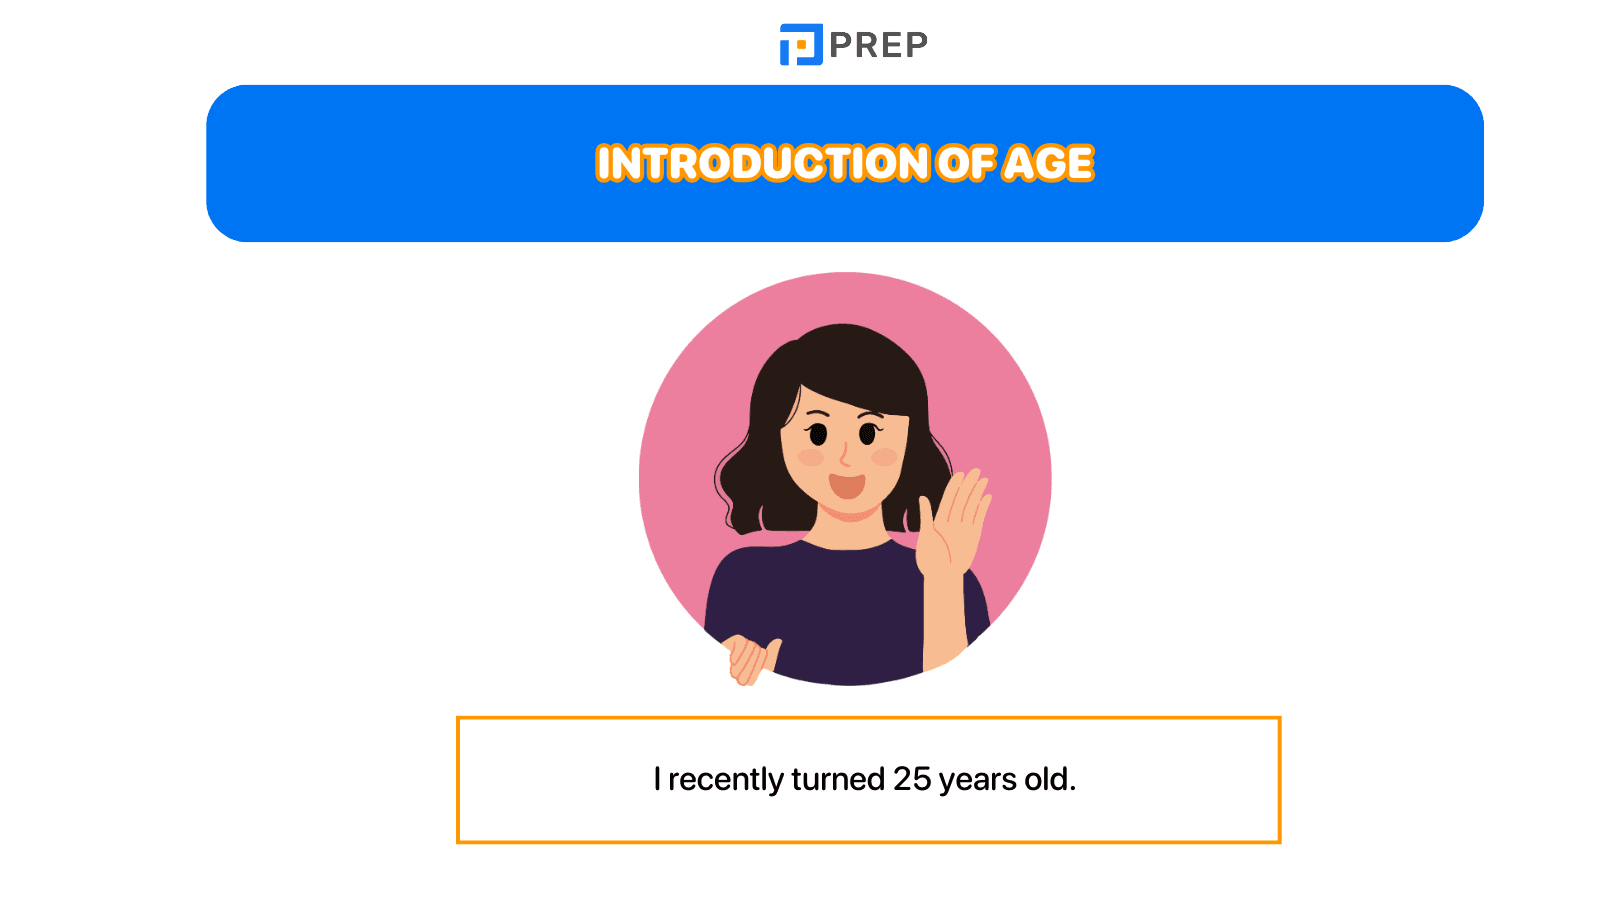 Introduction of age